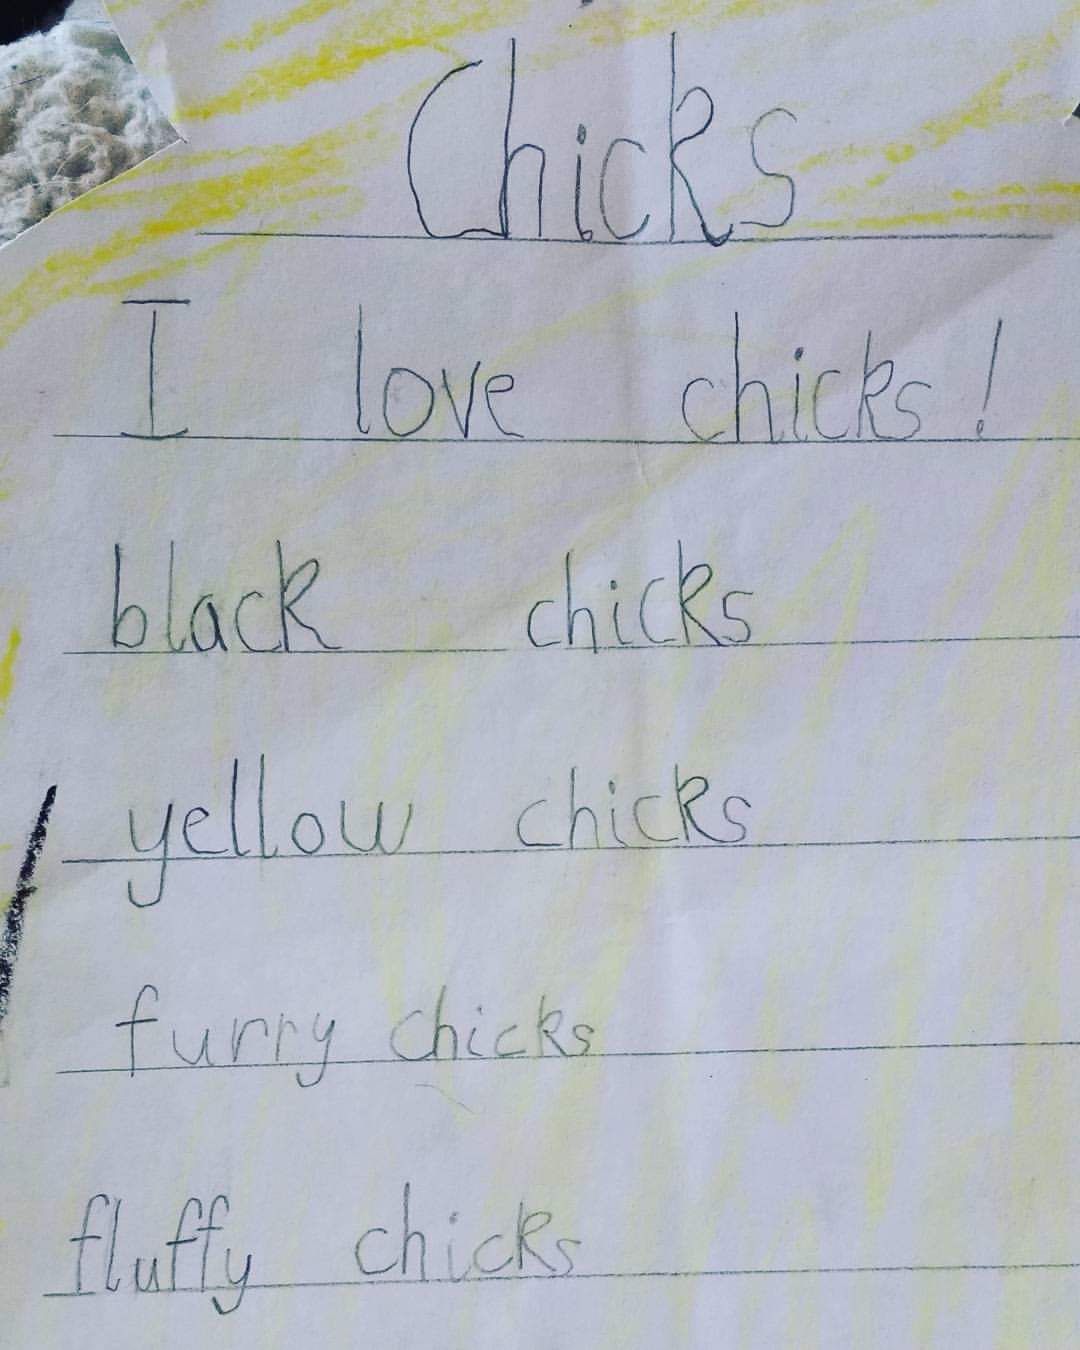 A poem my brother wrote when he was 5. It's about chickens, I swear....